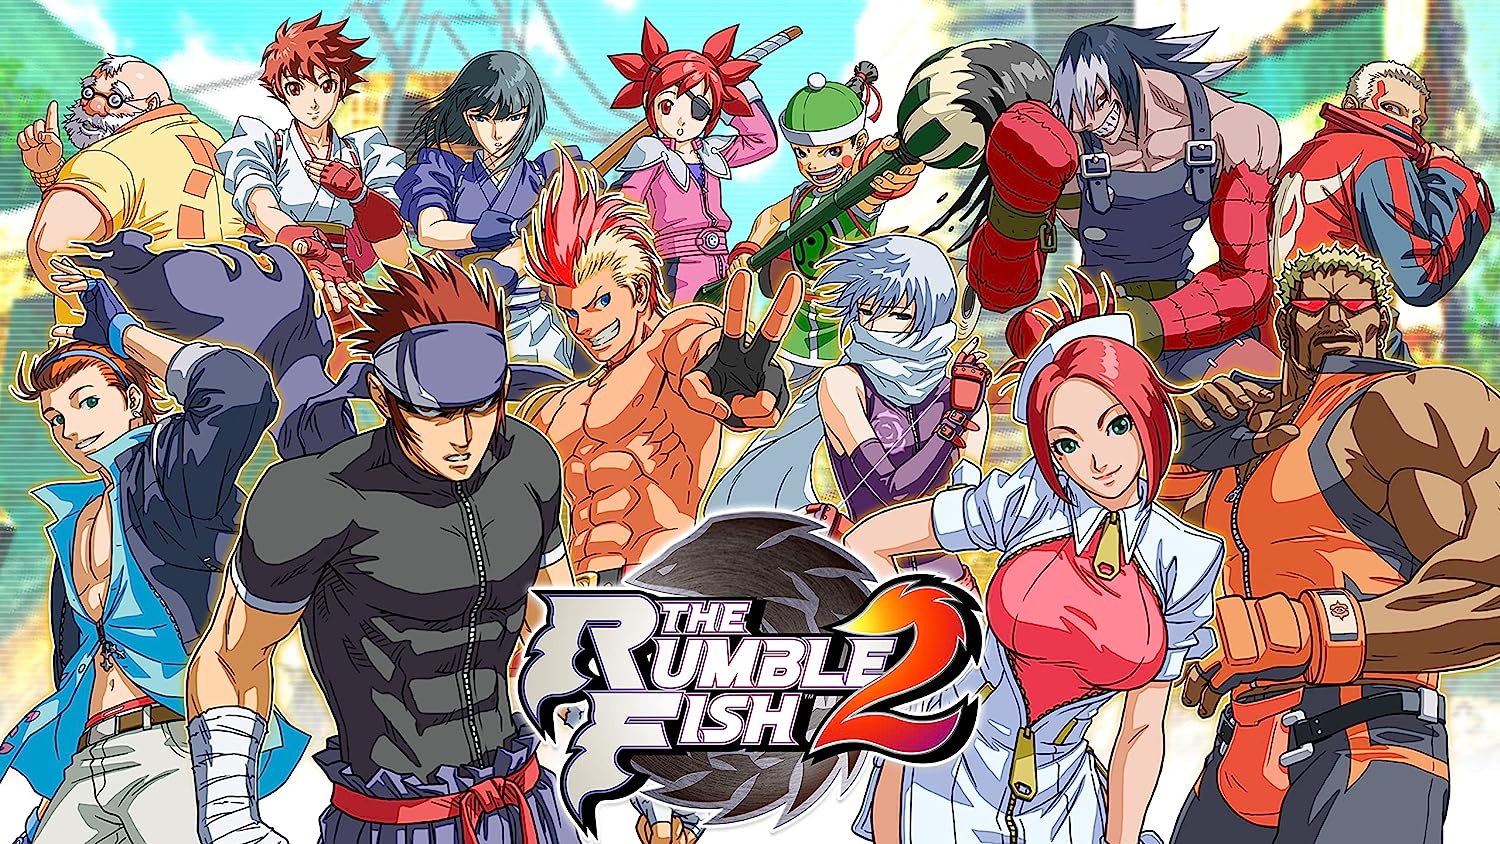 THE RUMBLEFISH 2 PS4